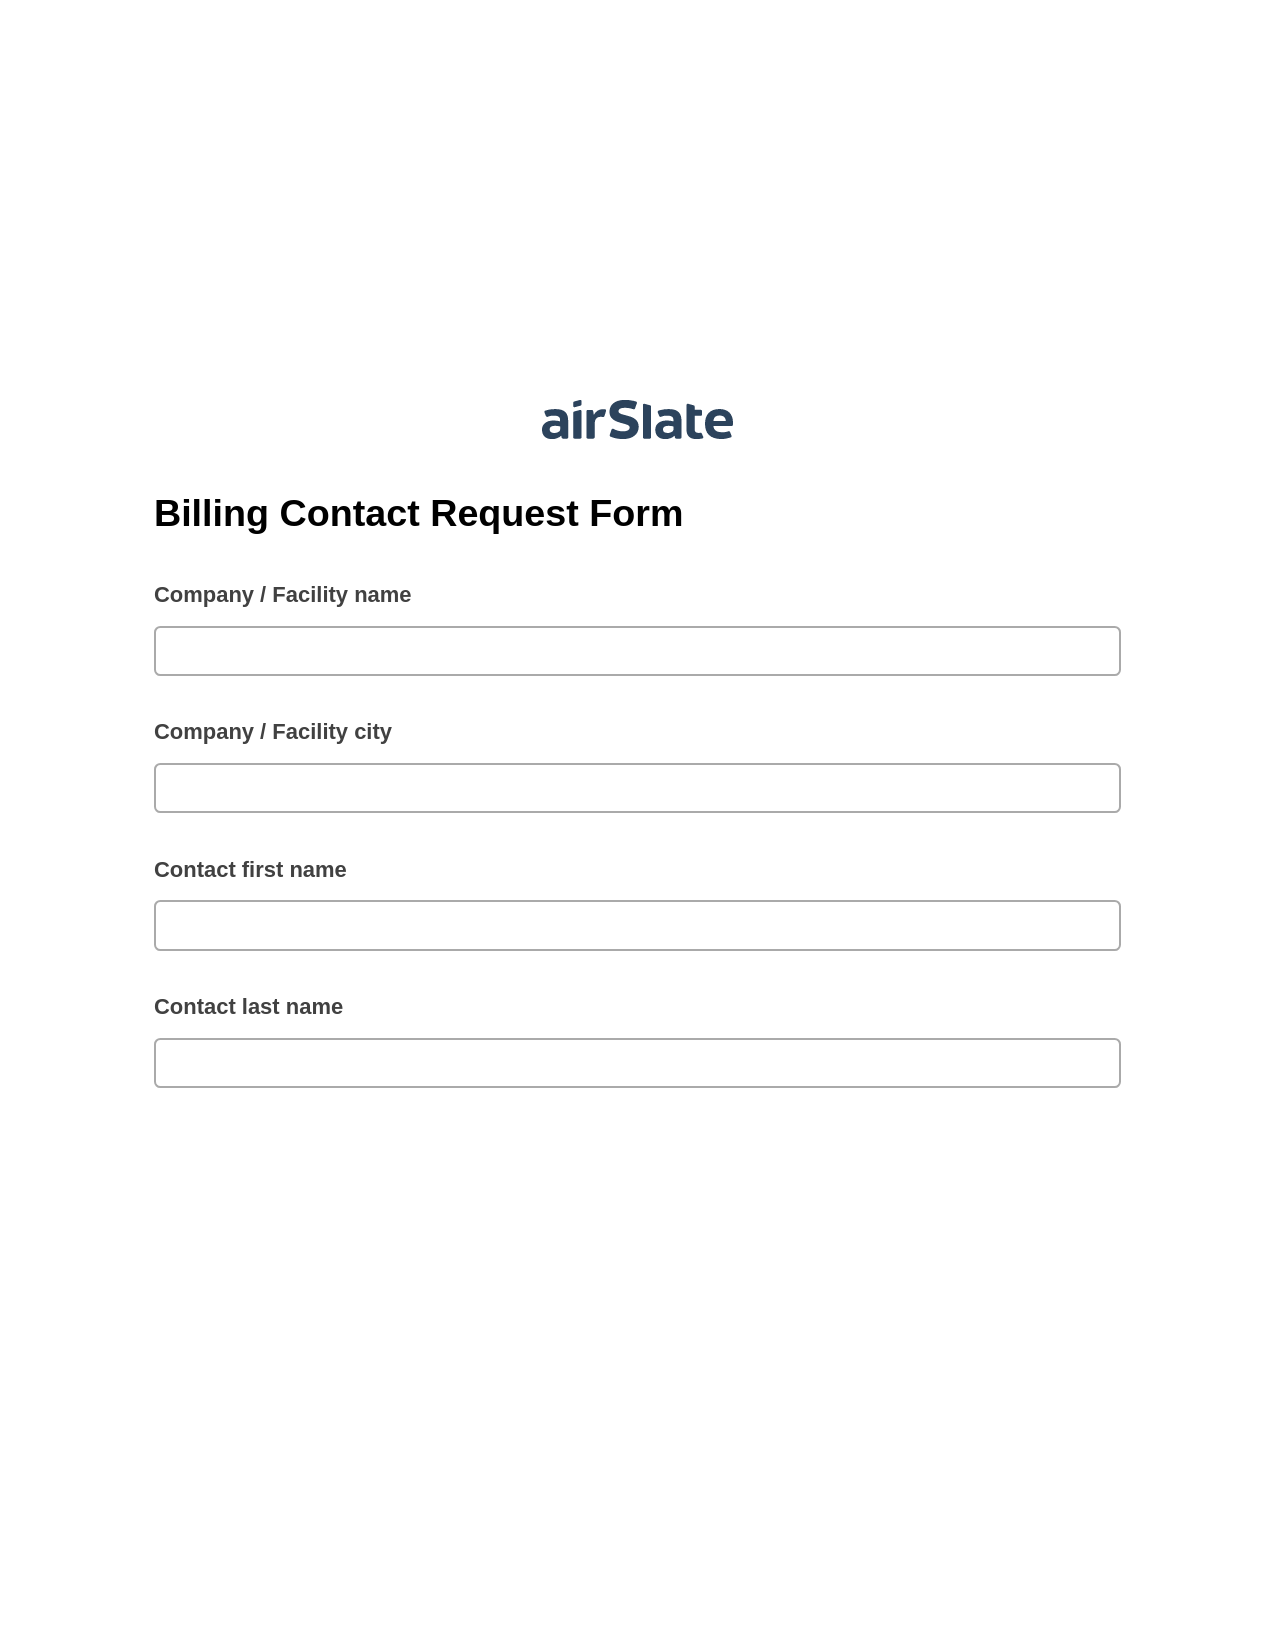 Billing Contact Request Form Pre-fill Dropdowns from CSV File Bot, Update MS Dynamics 365 Records Bot, Box Bot